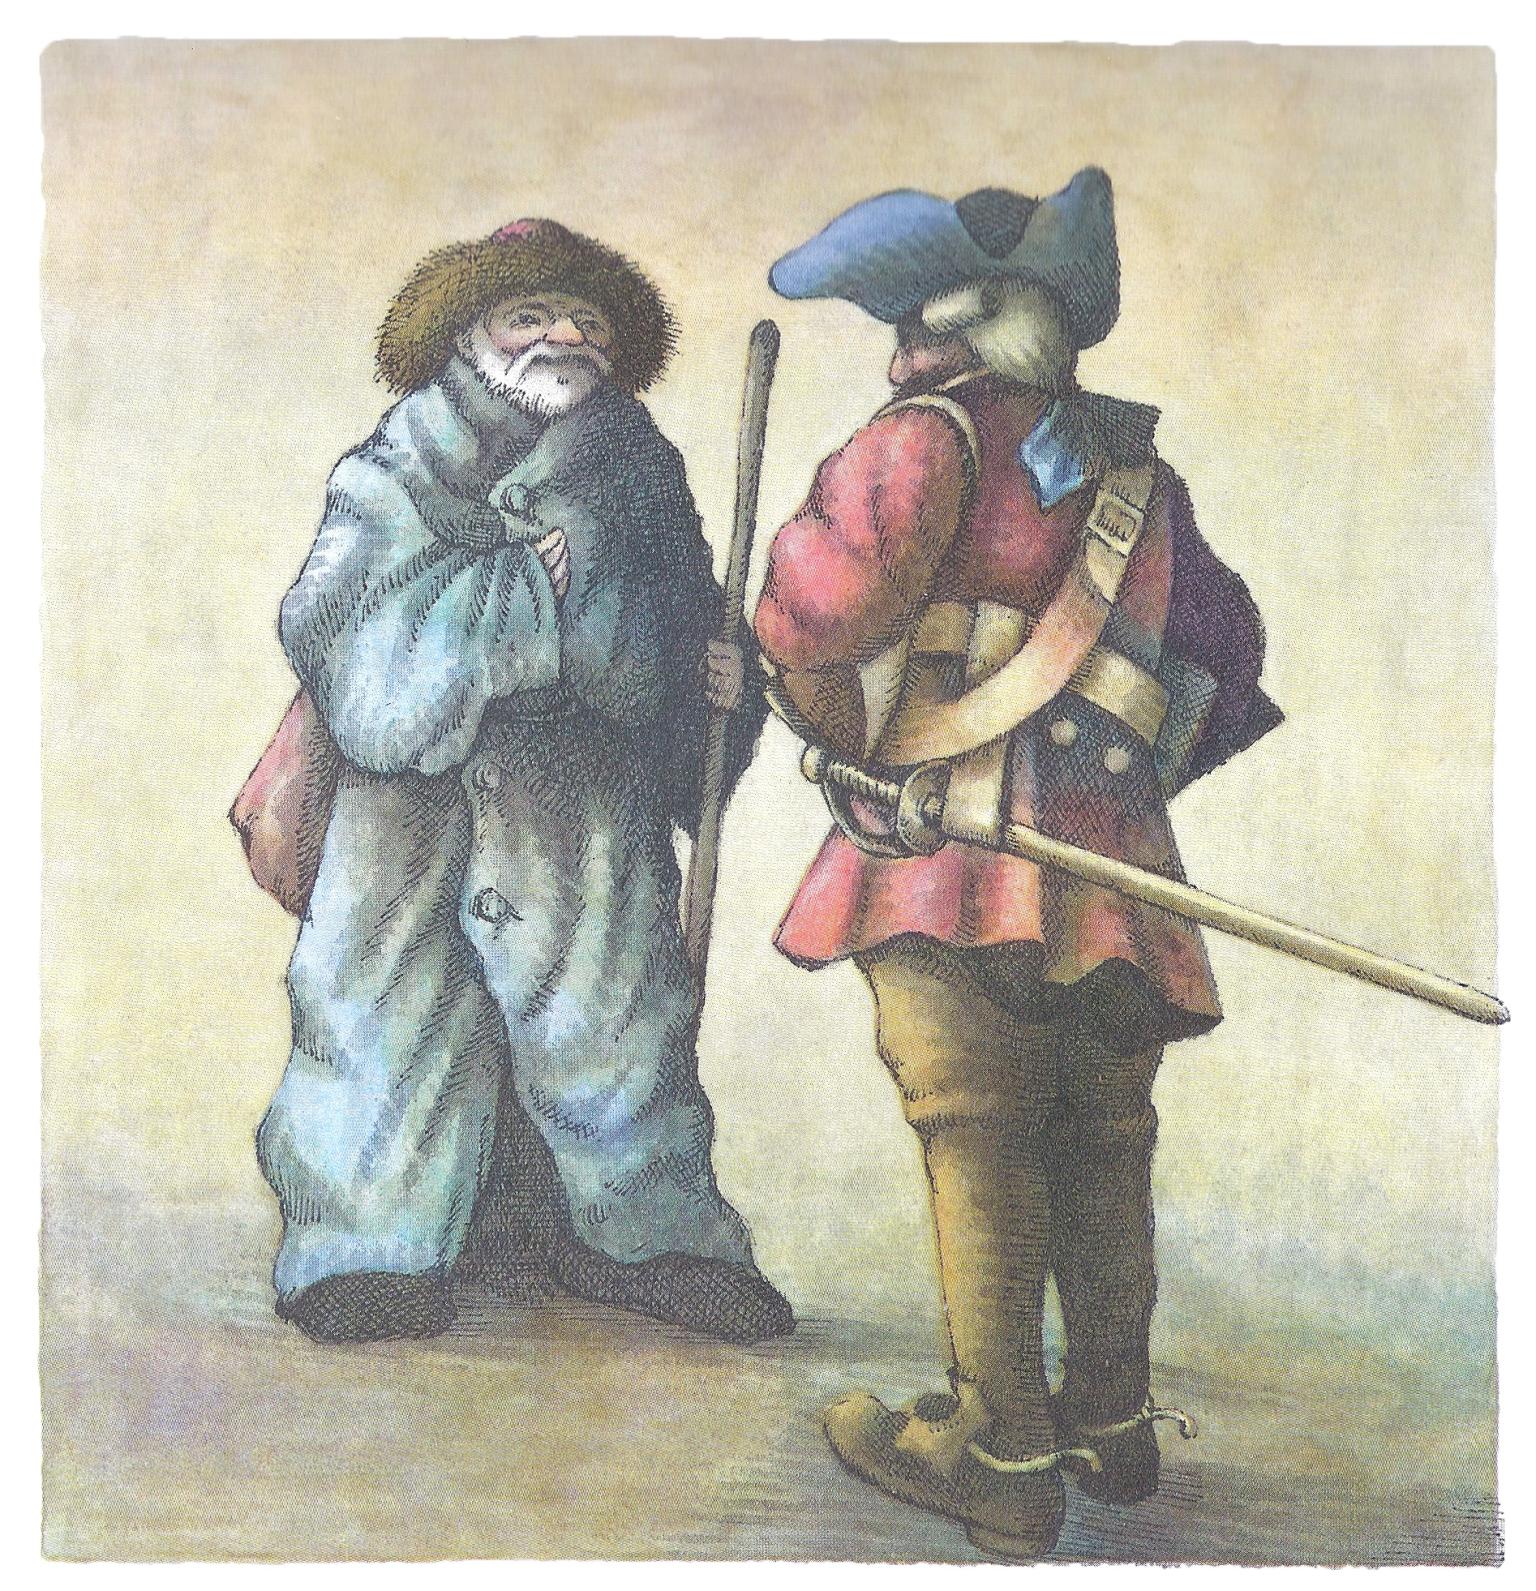 Painting of two figures facing each other, the one on the right in hat, military coat, and belt, and the one on the left in long robe and holding tall stick.